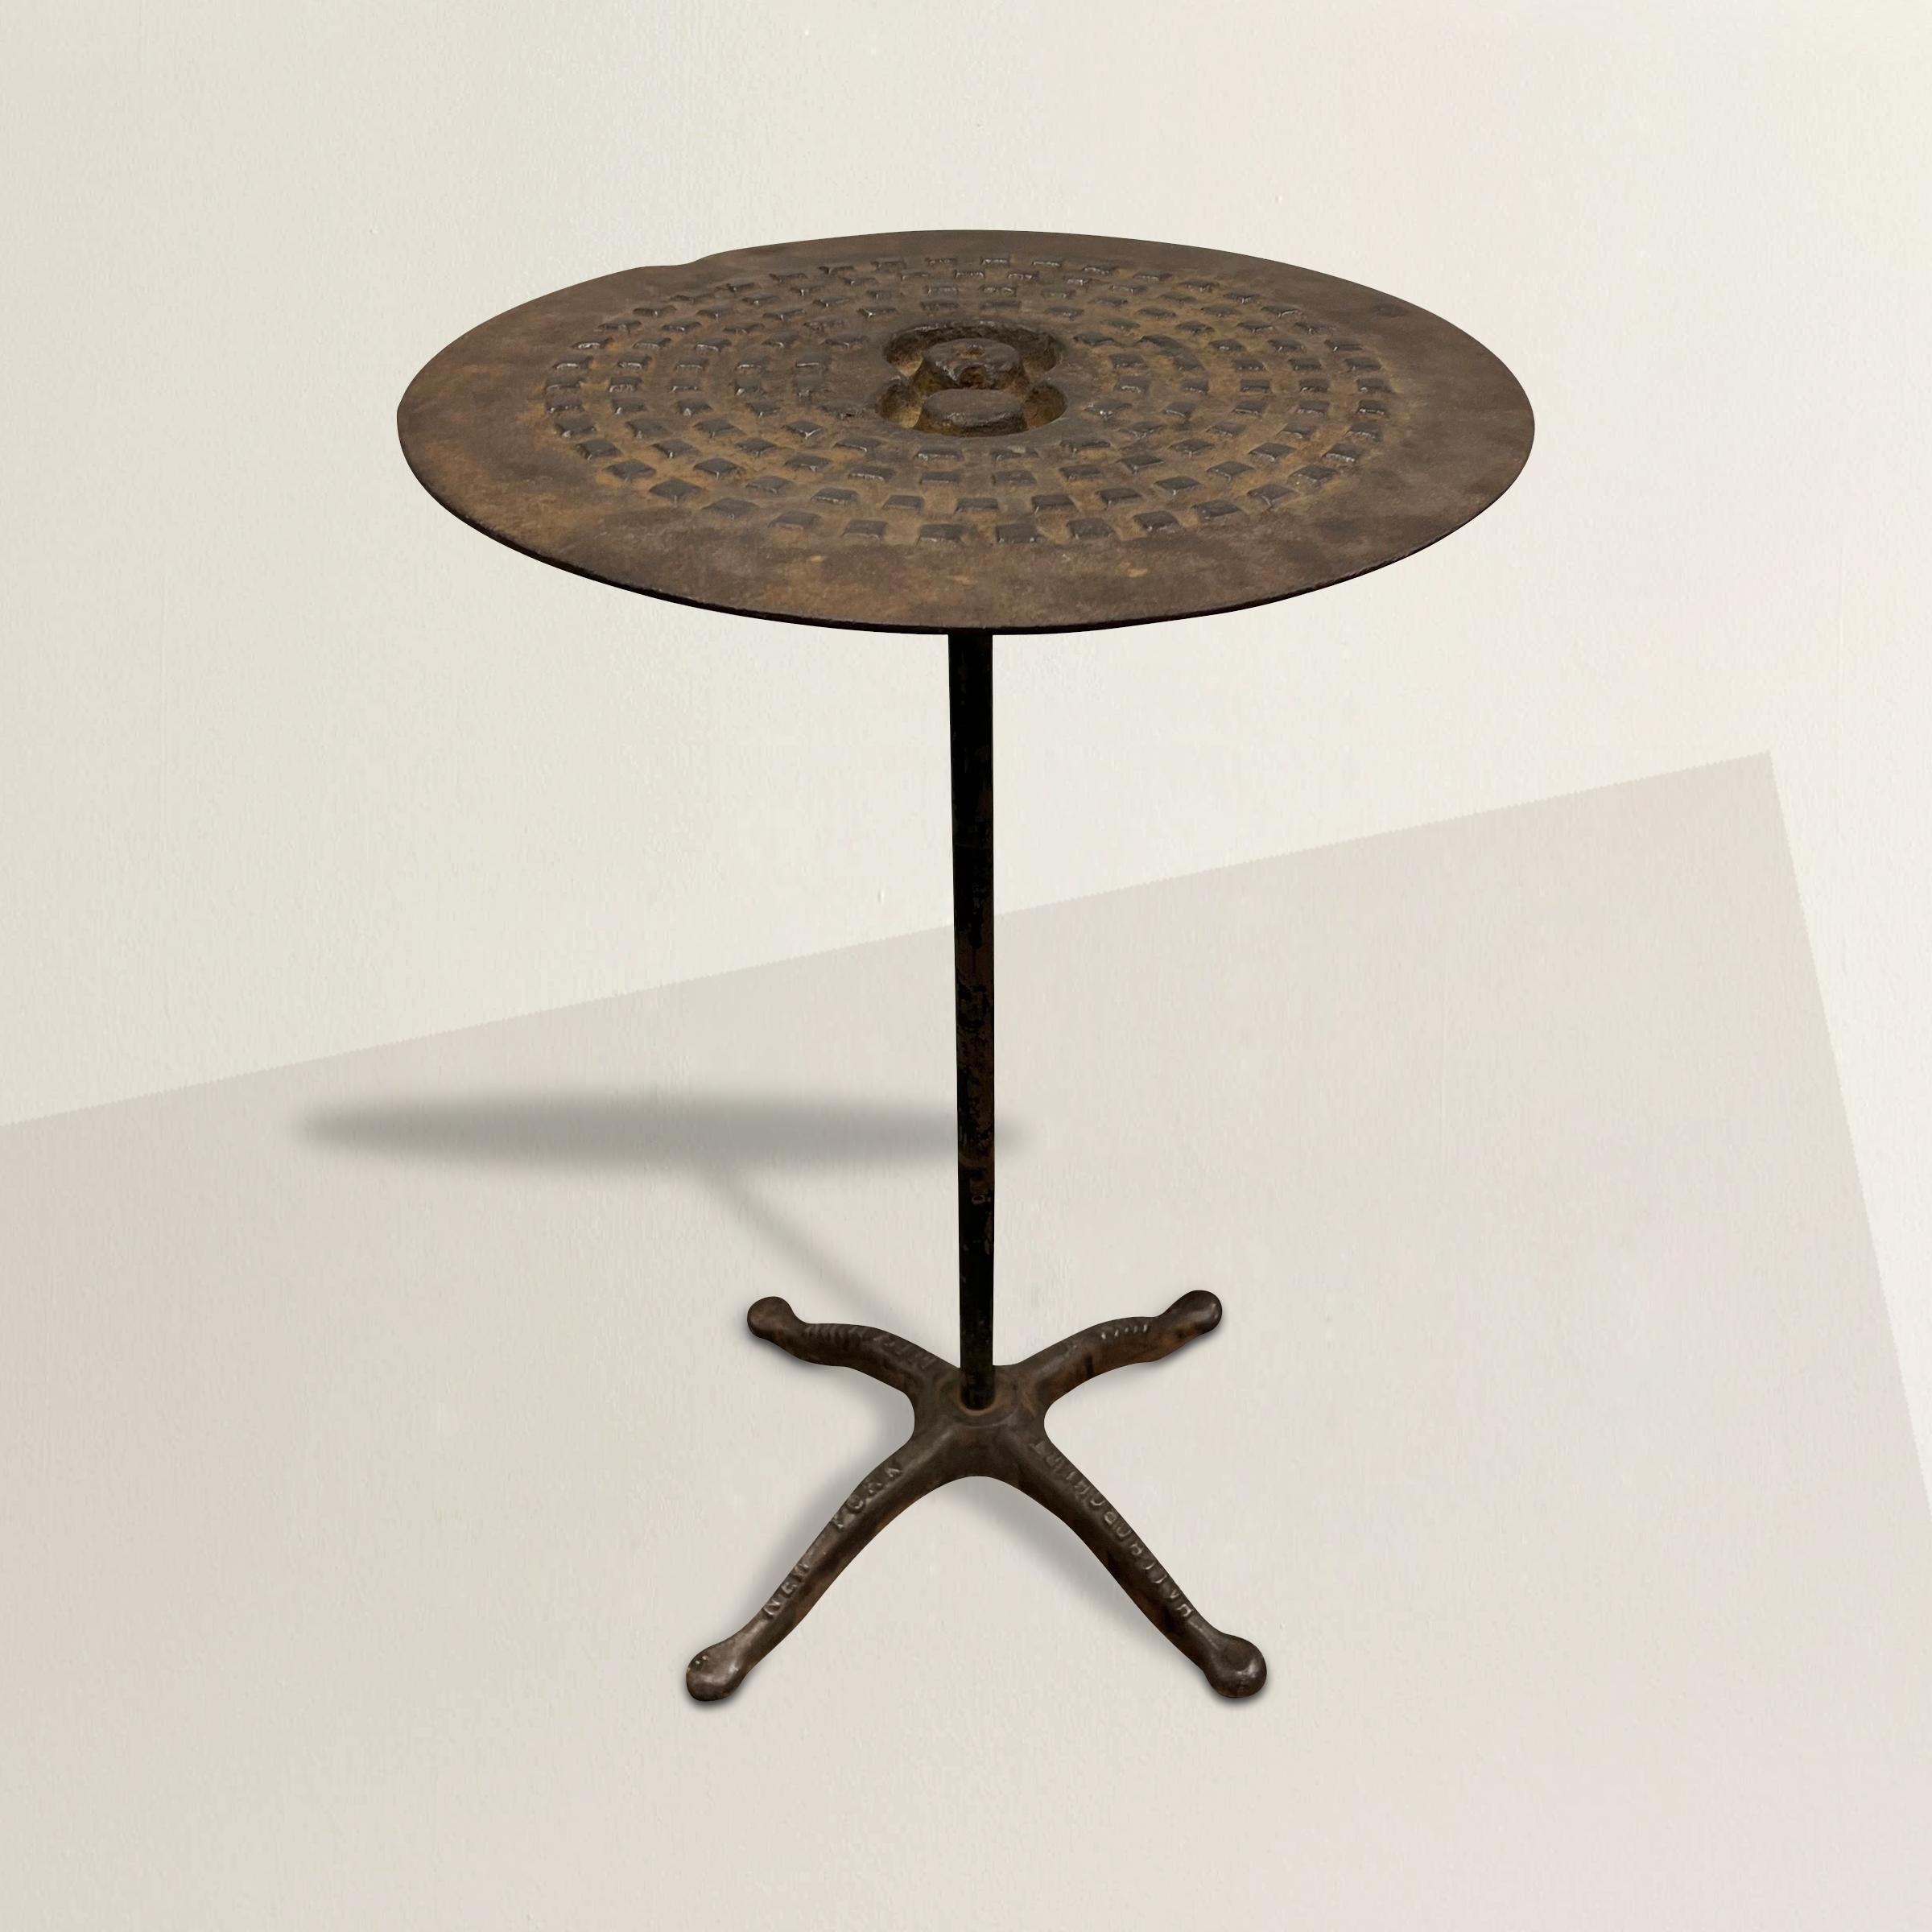 A whimsical and steadfast side table with a top made from a New York City manhole cover and with the number 8 cast into the top. The base is from a dressmaker's dress form. The perfect drinks table next to your favorite armchair, side table next to